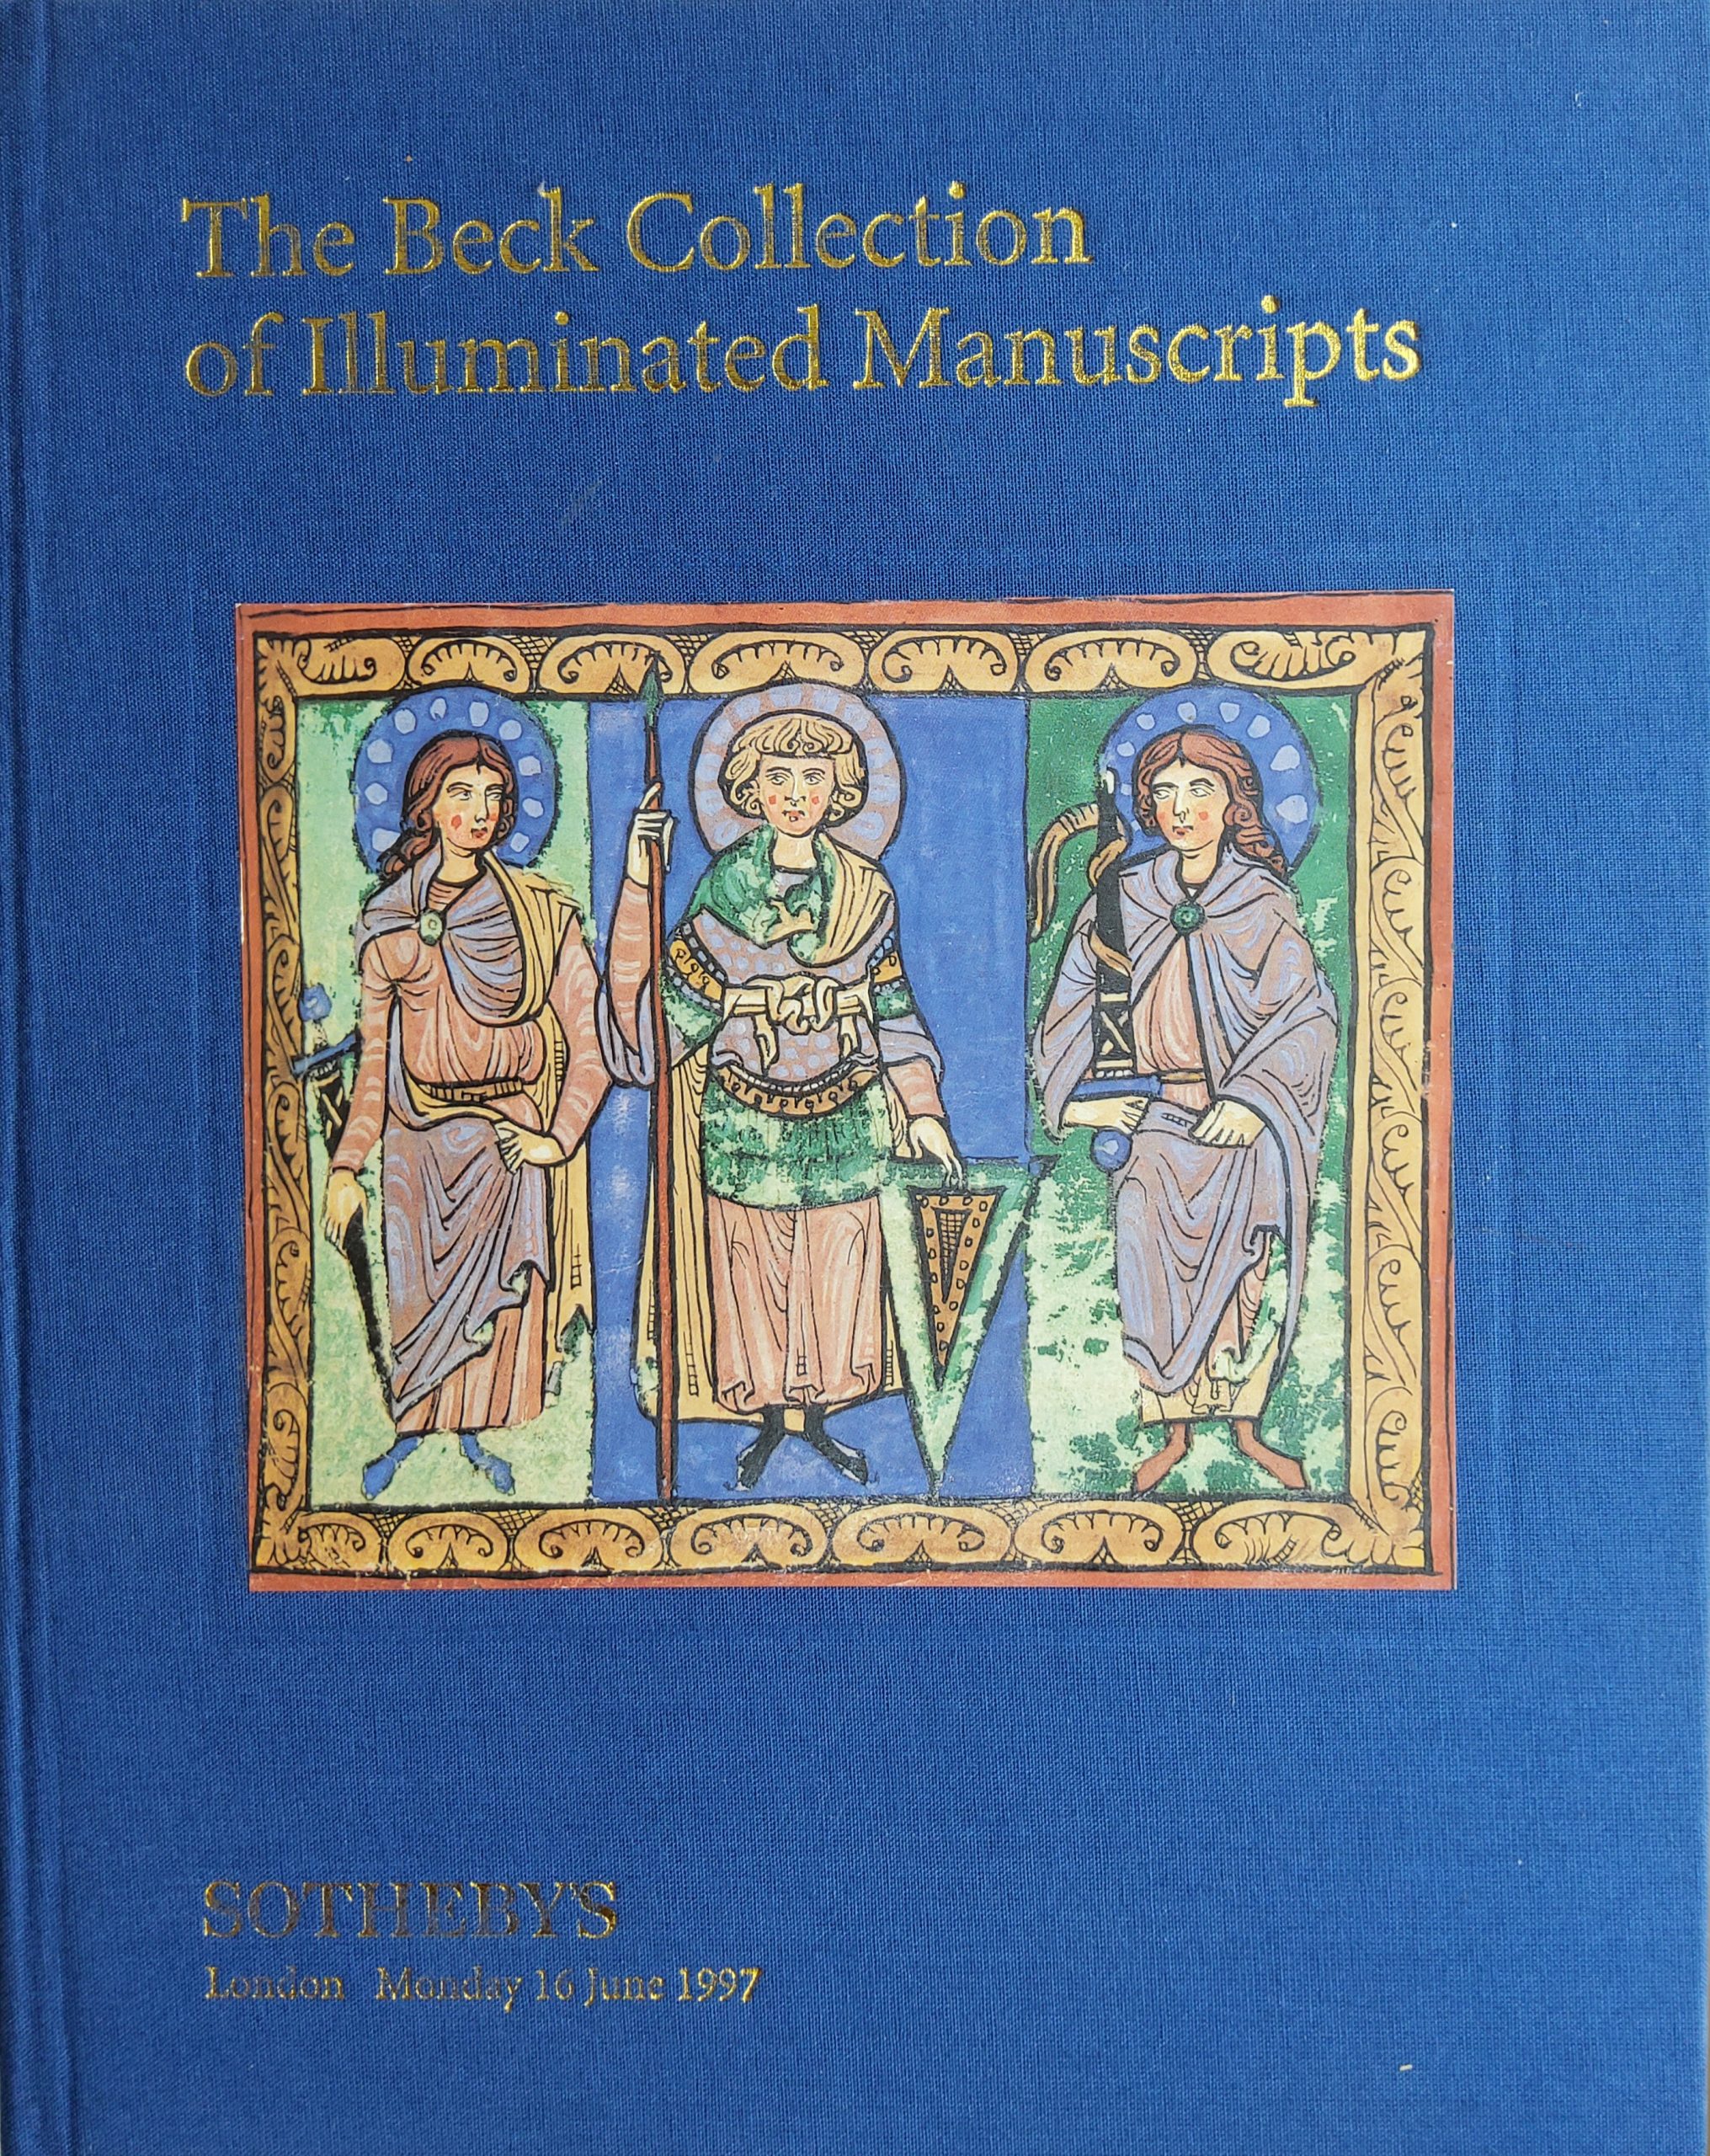 Sotheby’s Catalogues of Western Manuscripts and Miniatures 29 November 1990 [with] The Beck Collection of Illuminated Manuscripts 16 June 1997